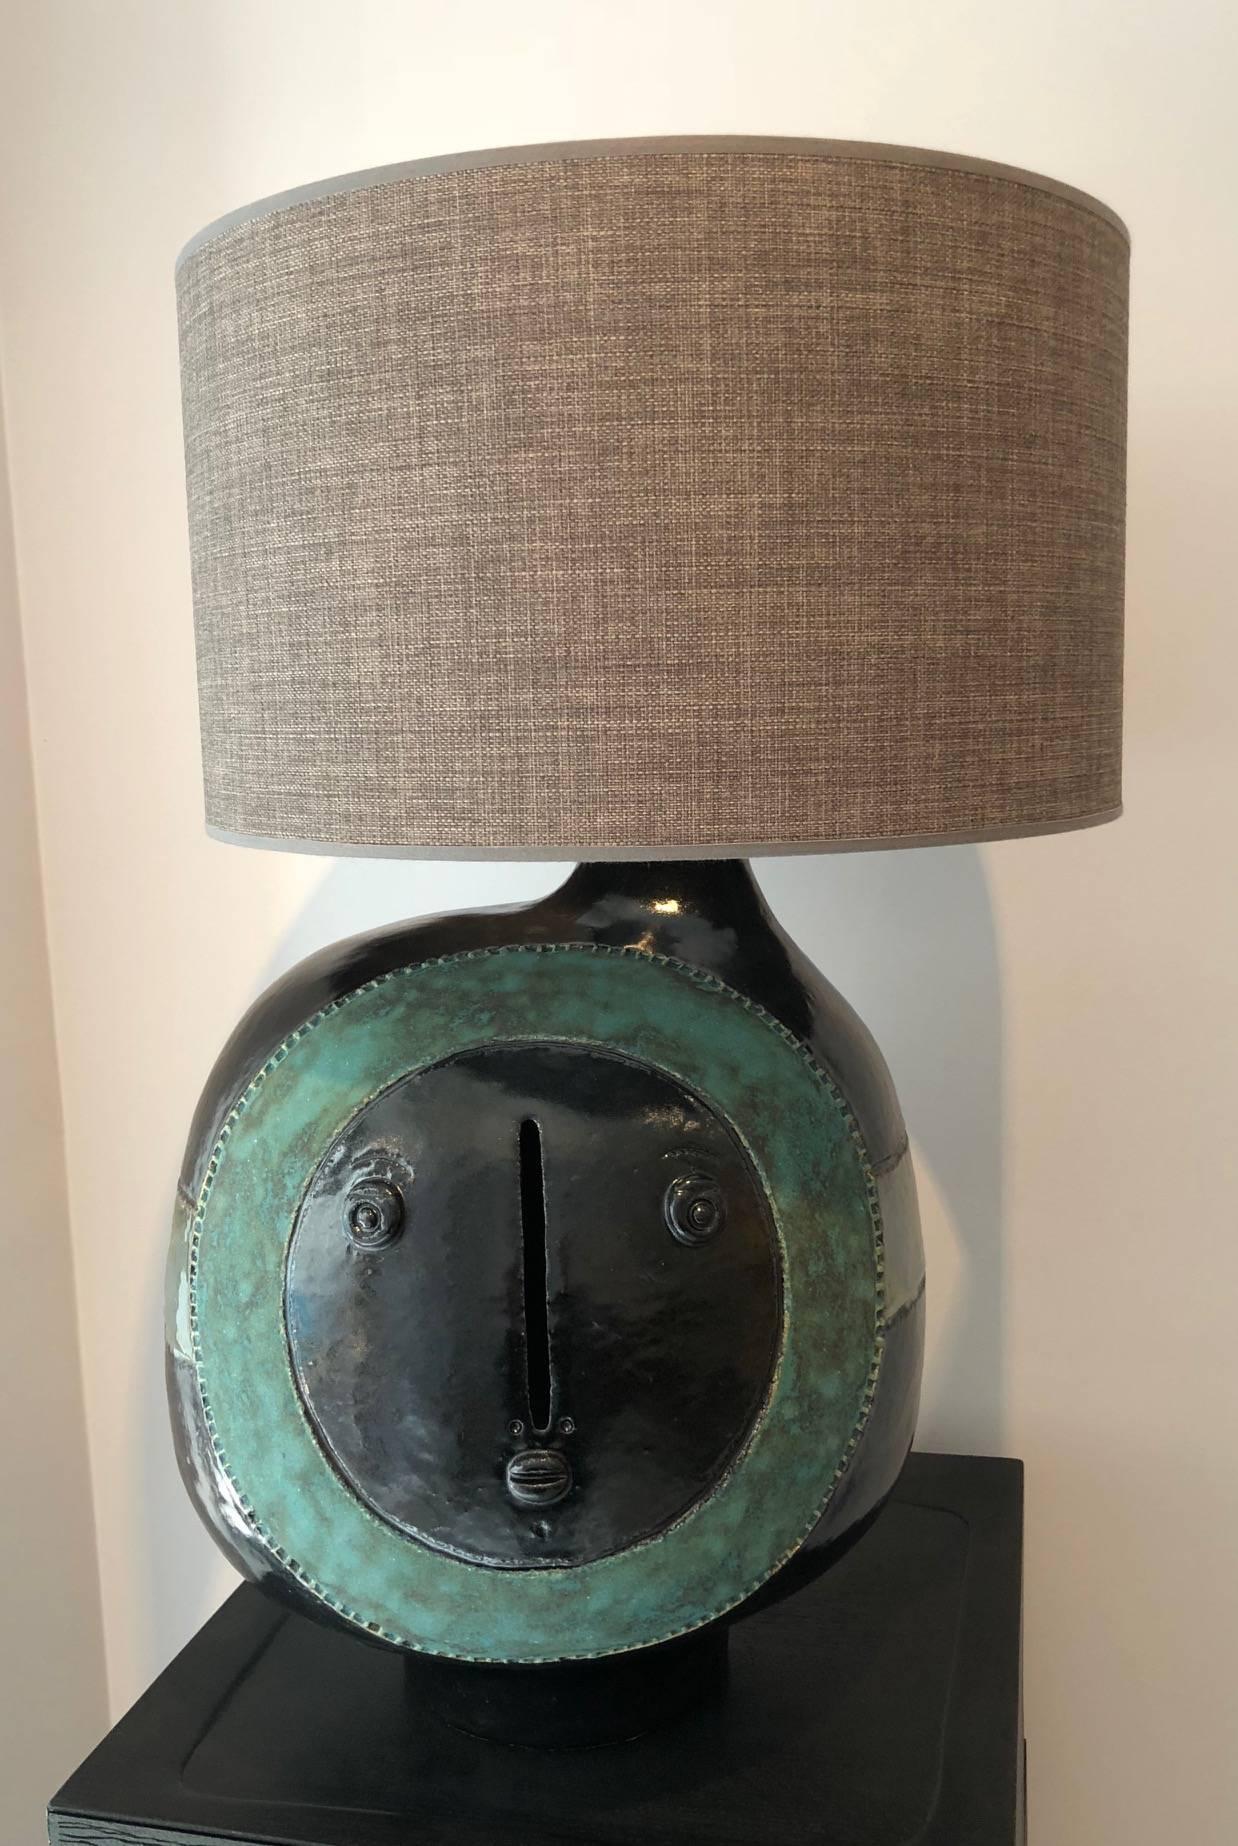 Large hand-sculpted ceramic lamp base, stoneware glazed in shiny black, decorated with two biomorphic visages sculpted and incised in green enamel and stripes on sides.

One of a kind handmade piece signed by the French ceramicists. 

The height